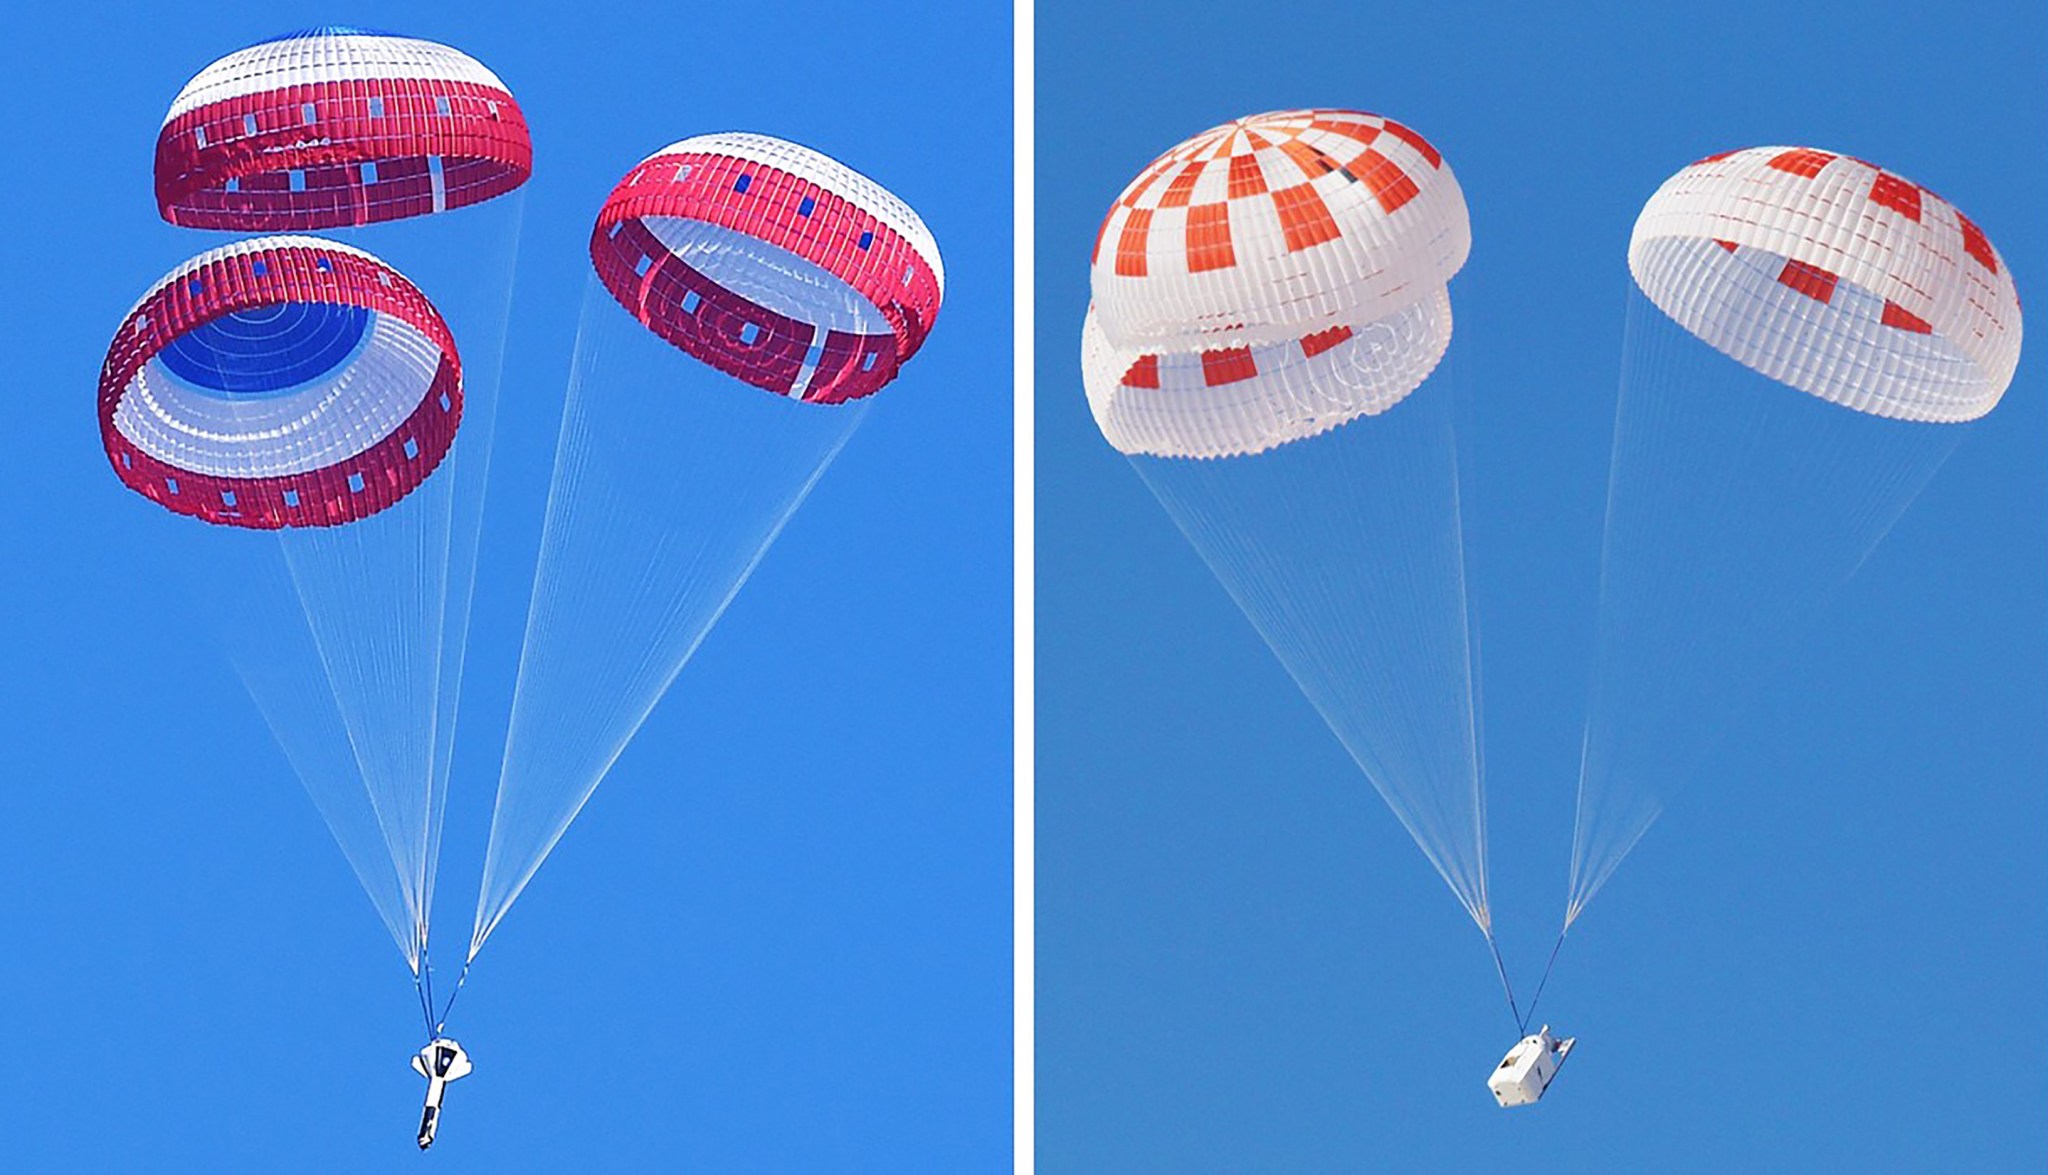 Boeing, at left, and SpaceX, at right, conducted drop tests on their parachutes.